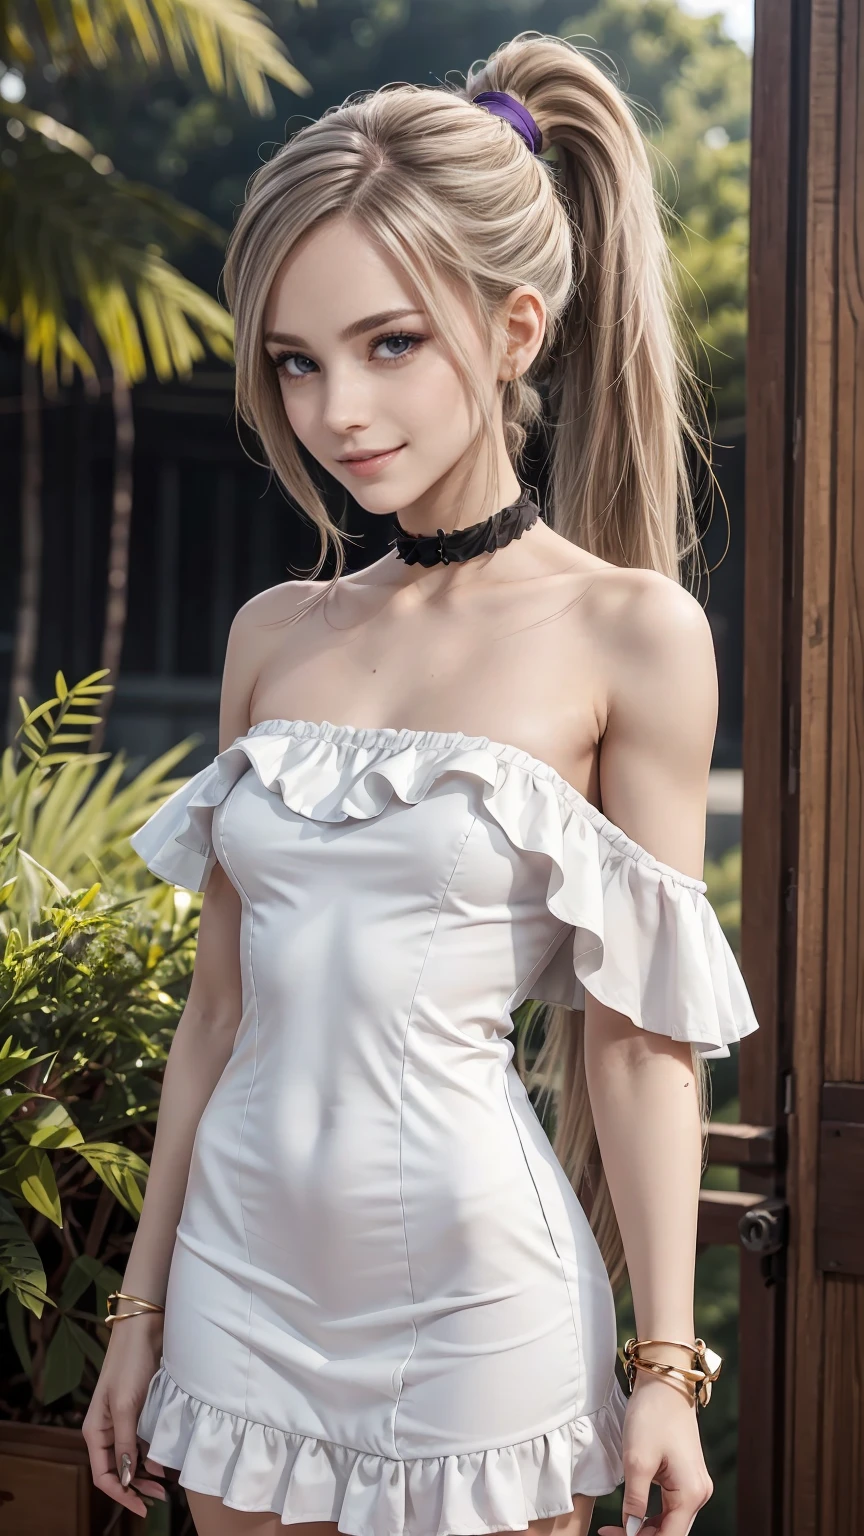 22 year old white female、Hair color is a gradation of brown and purple、eye color is blue、long hair、setting hair、Have a ponytail、accessories on wrist、I&#39;m wearing a choker、skin is smooth、smile、Slender but muscular body、My heart is pounding、high resolution、She is wearing a one-shoulder dress with frills.、